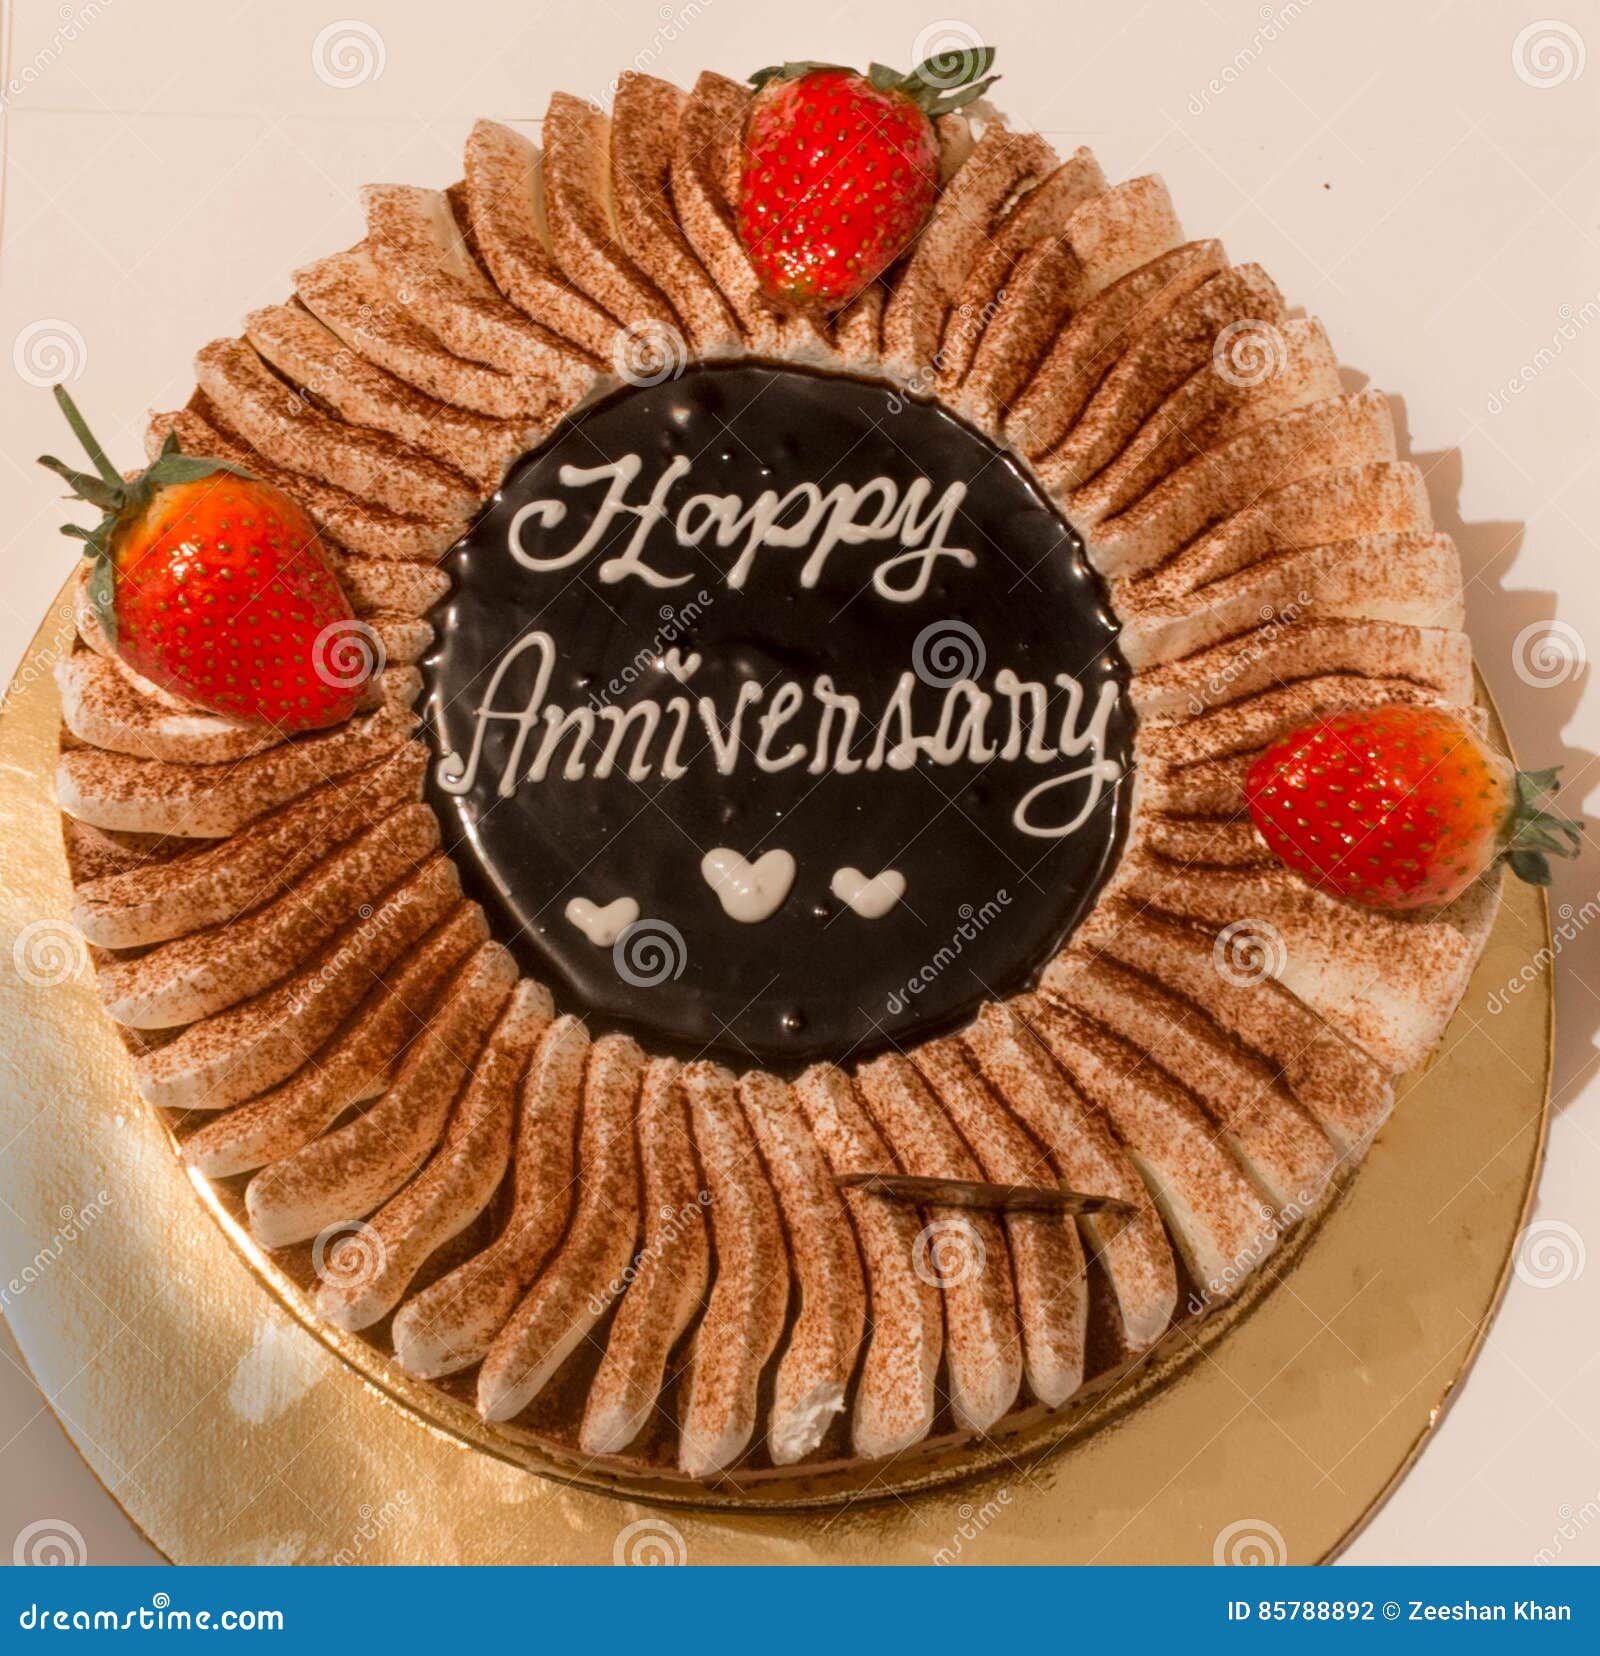 Delicious Chocolate Photo Cake For Anniversary - Wishingcart.in